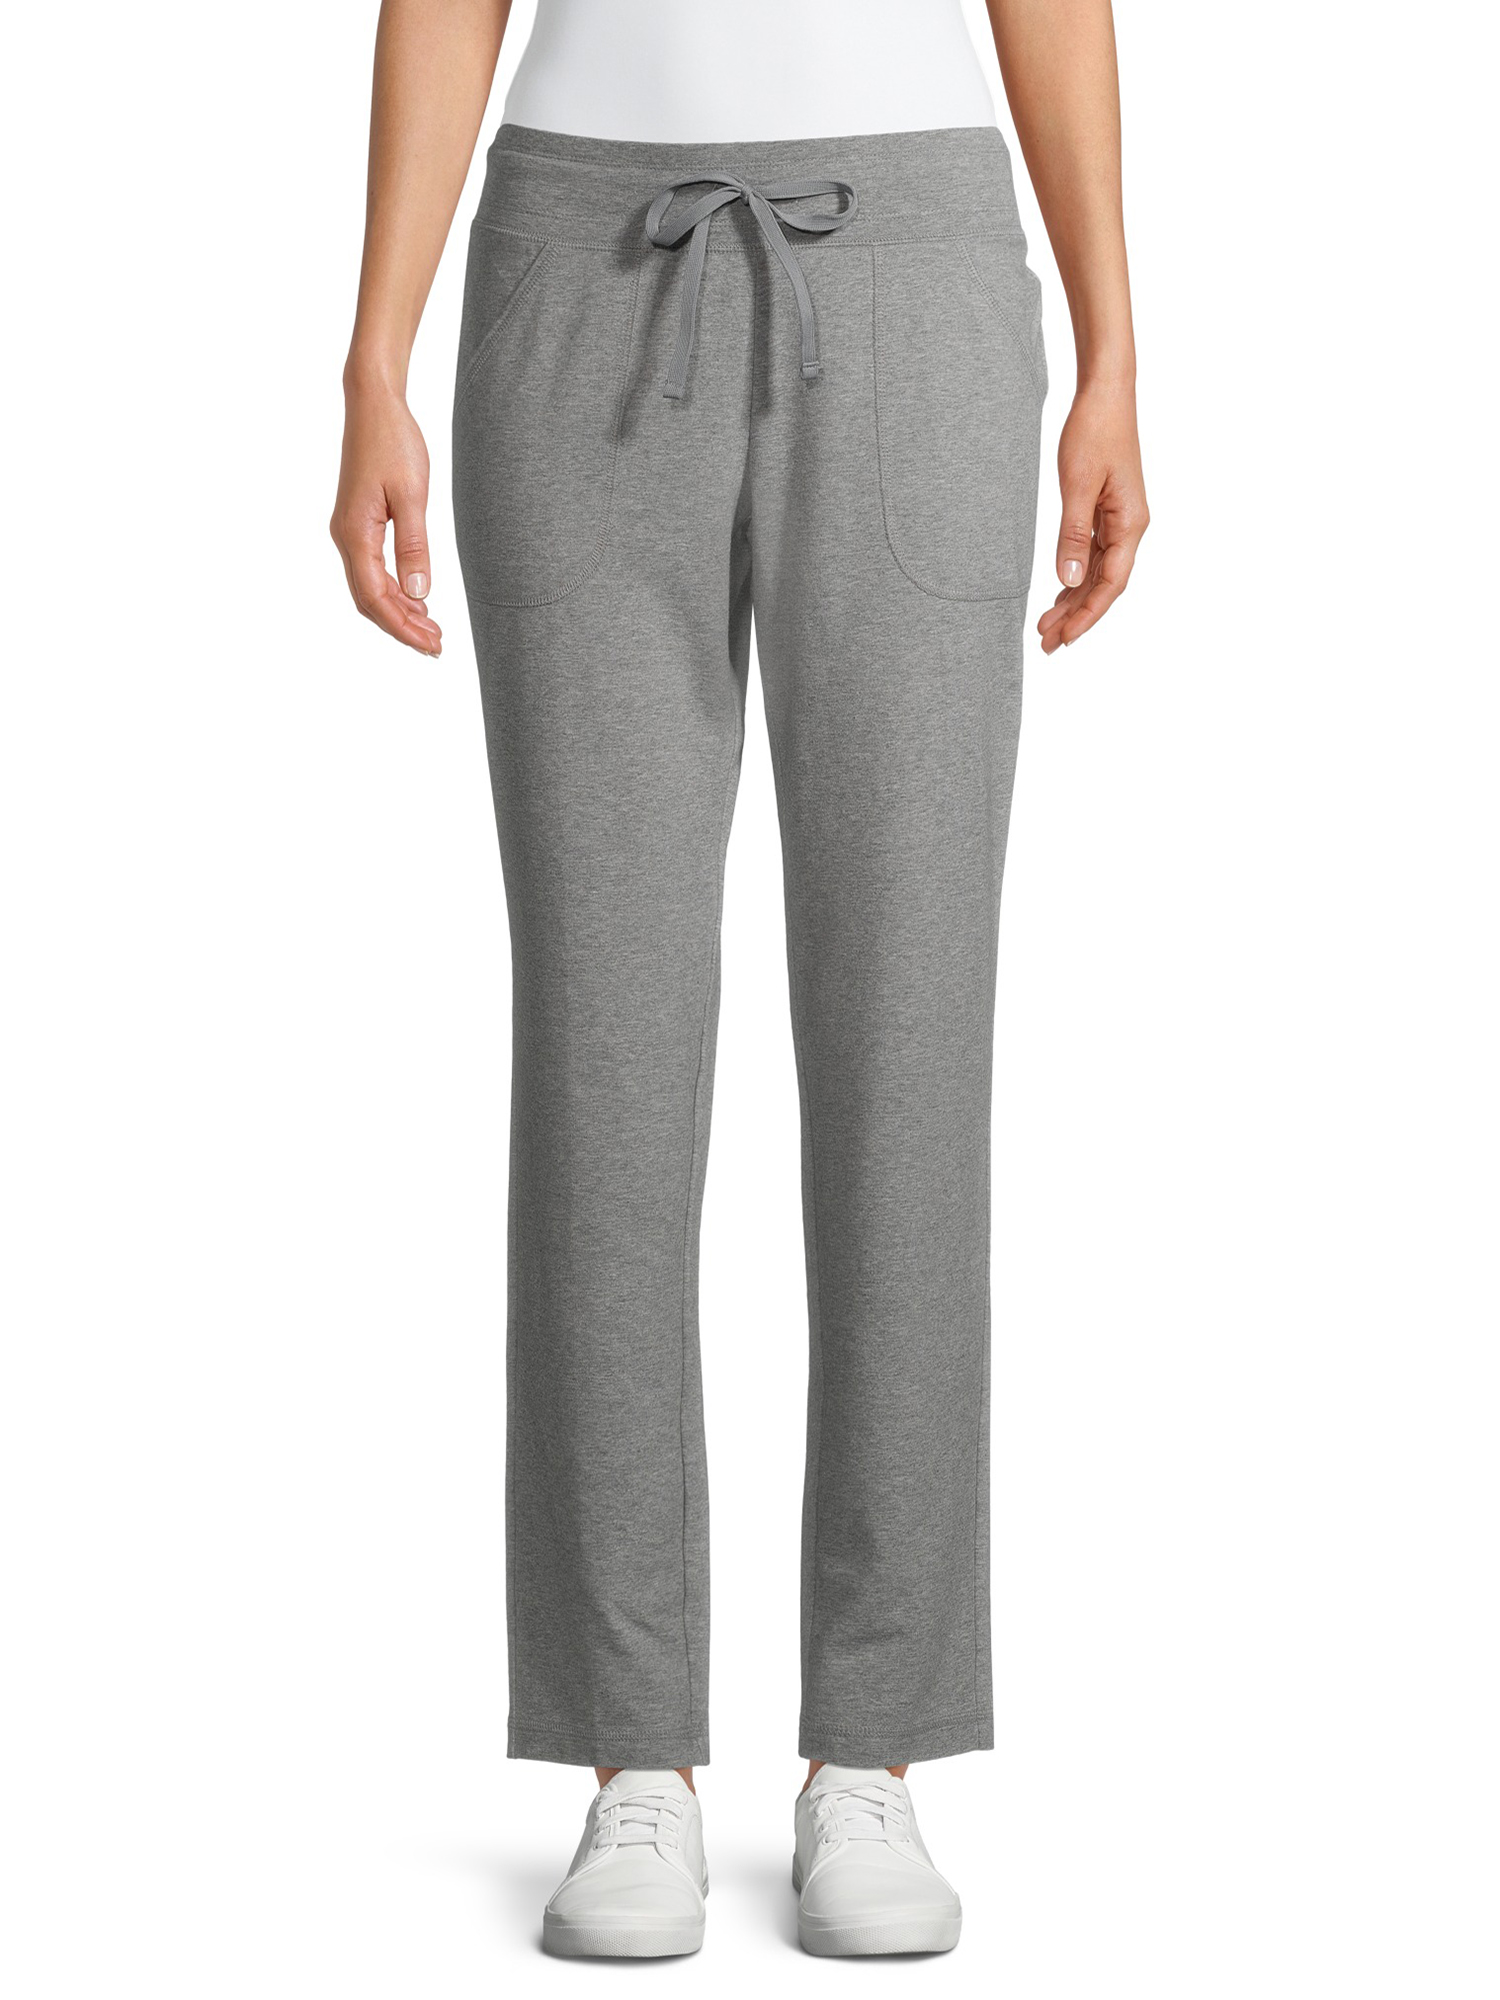 Athletic Works Women's Athleisure Core Knit Pants Available in Regular and Petite - image 1 of 6